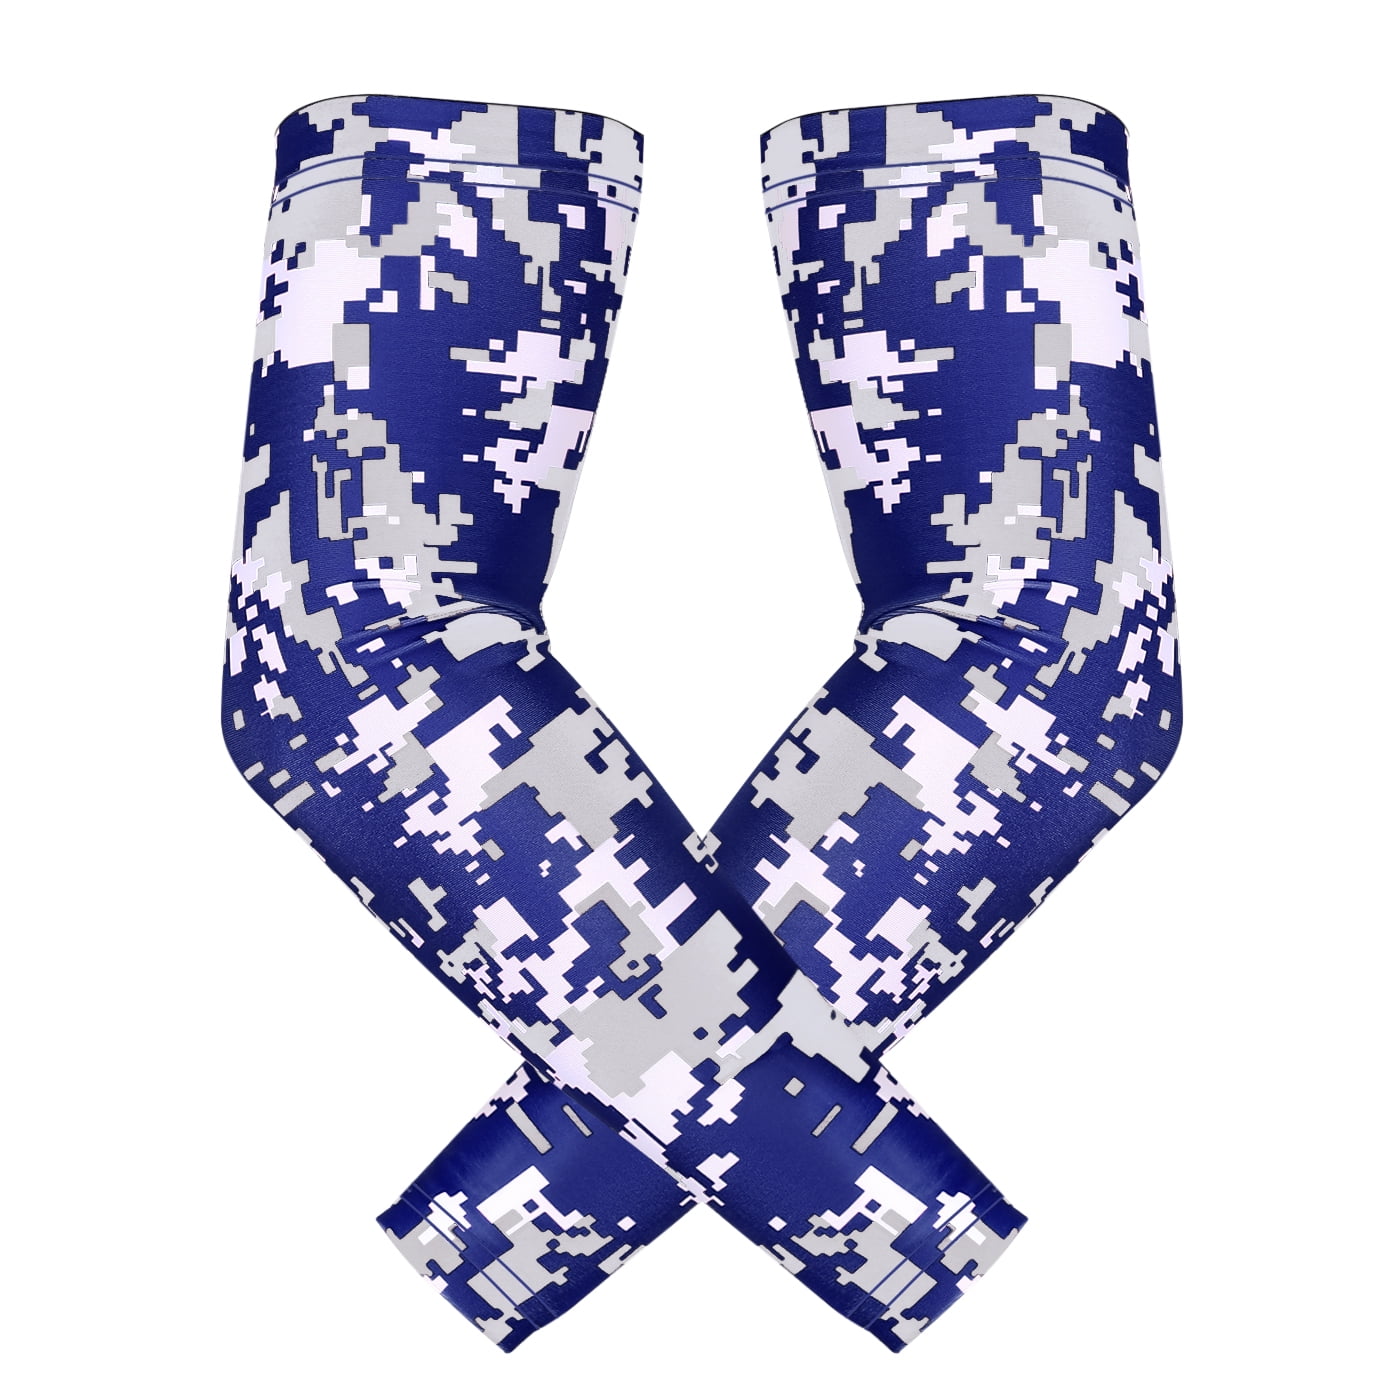 PICK YOUR NUMBER Baseball Kids YOUTH MEDIUM Arm Sleeve CAMO NAVY BLUE GRAY WHITE 